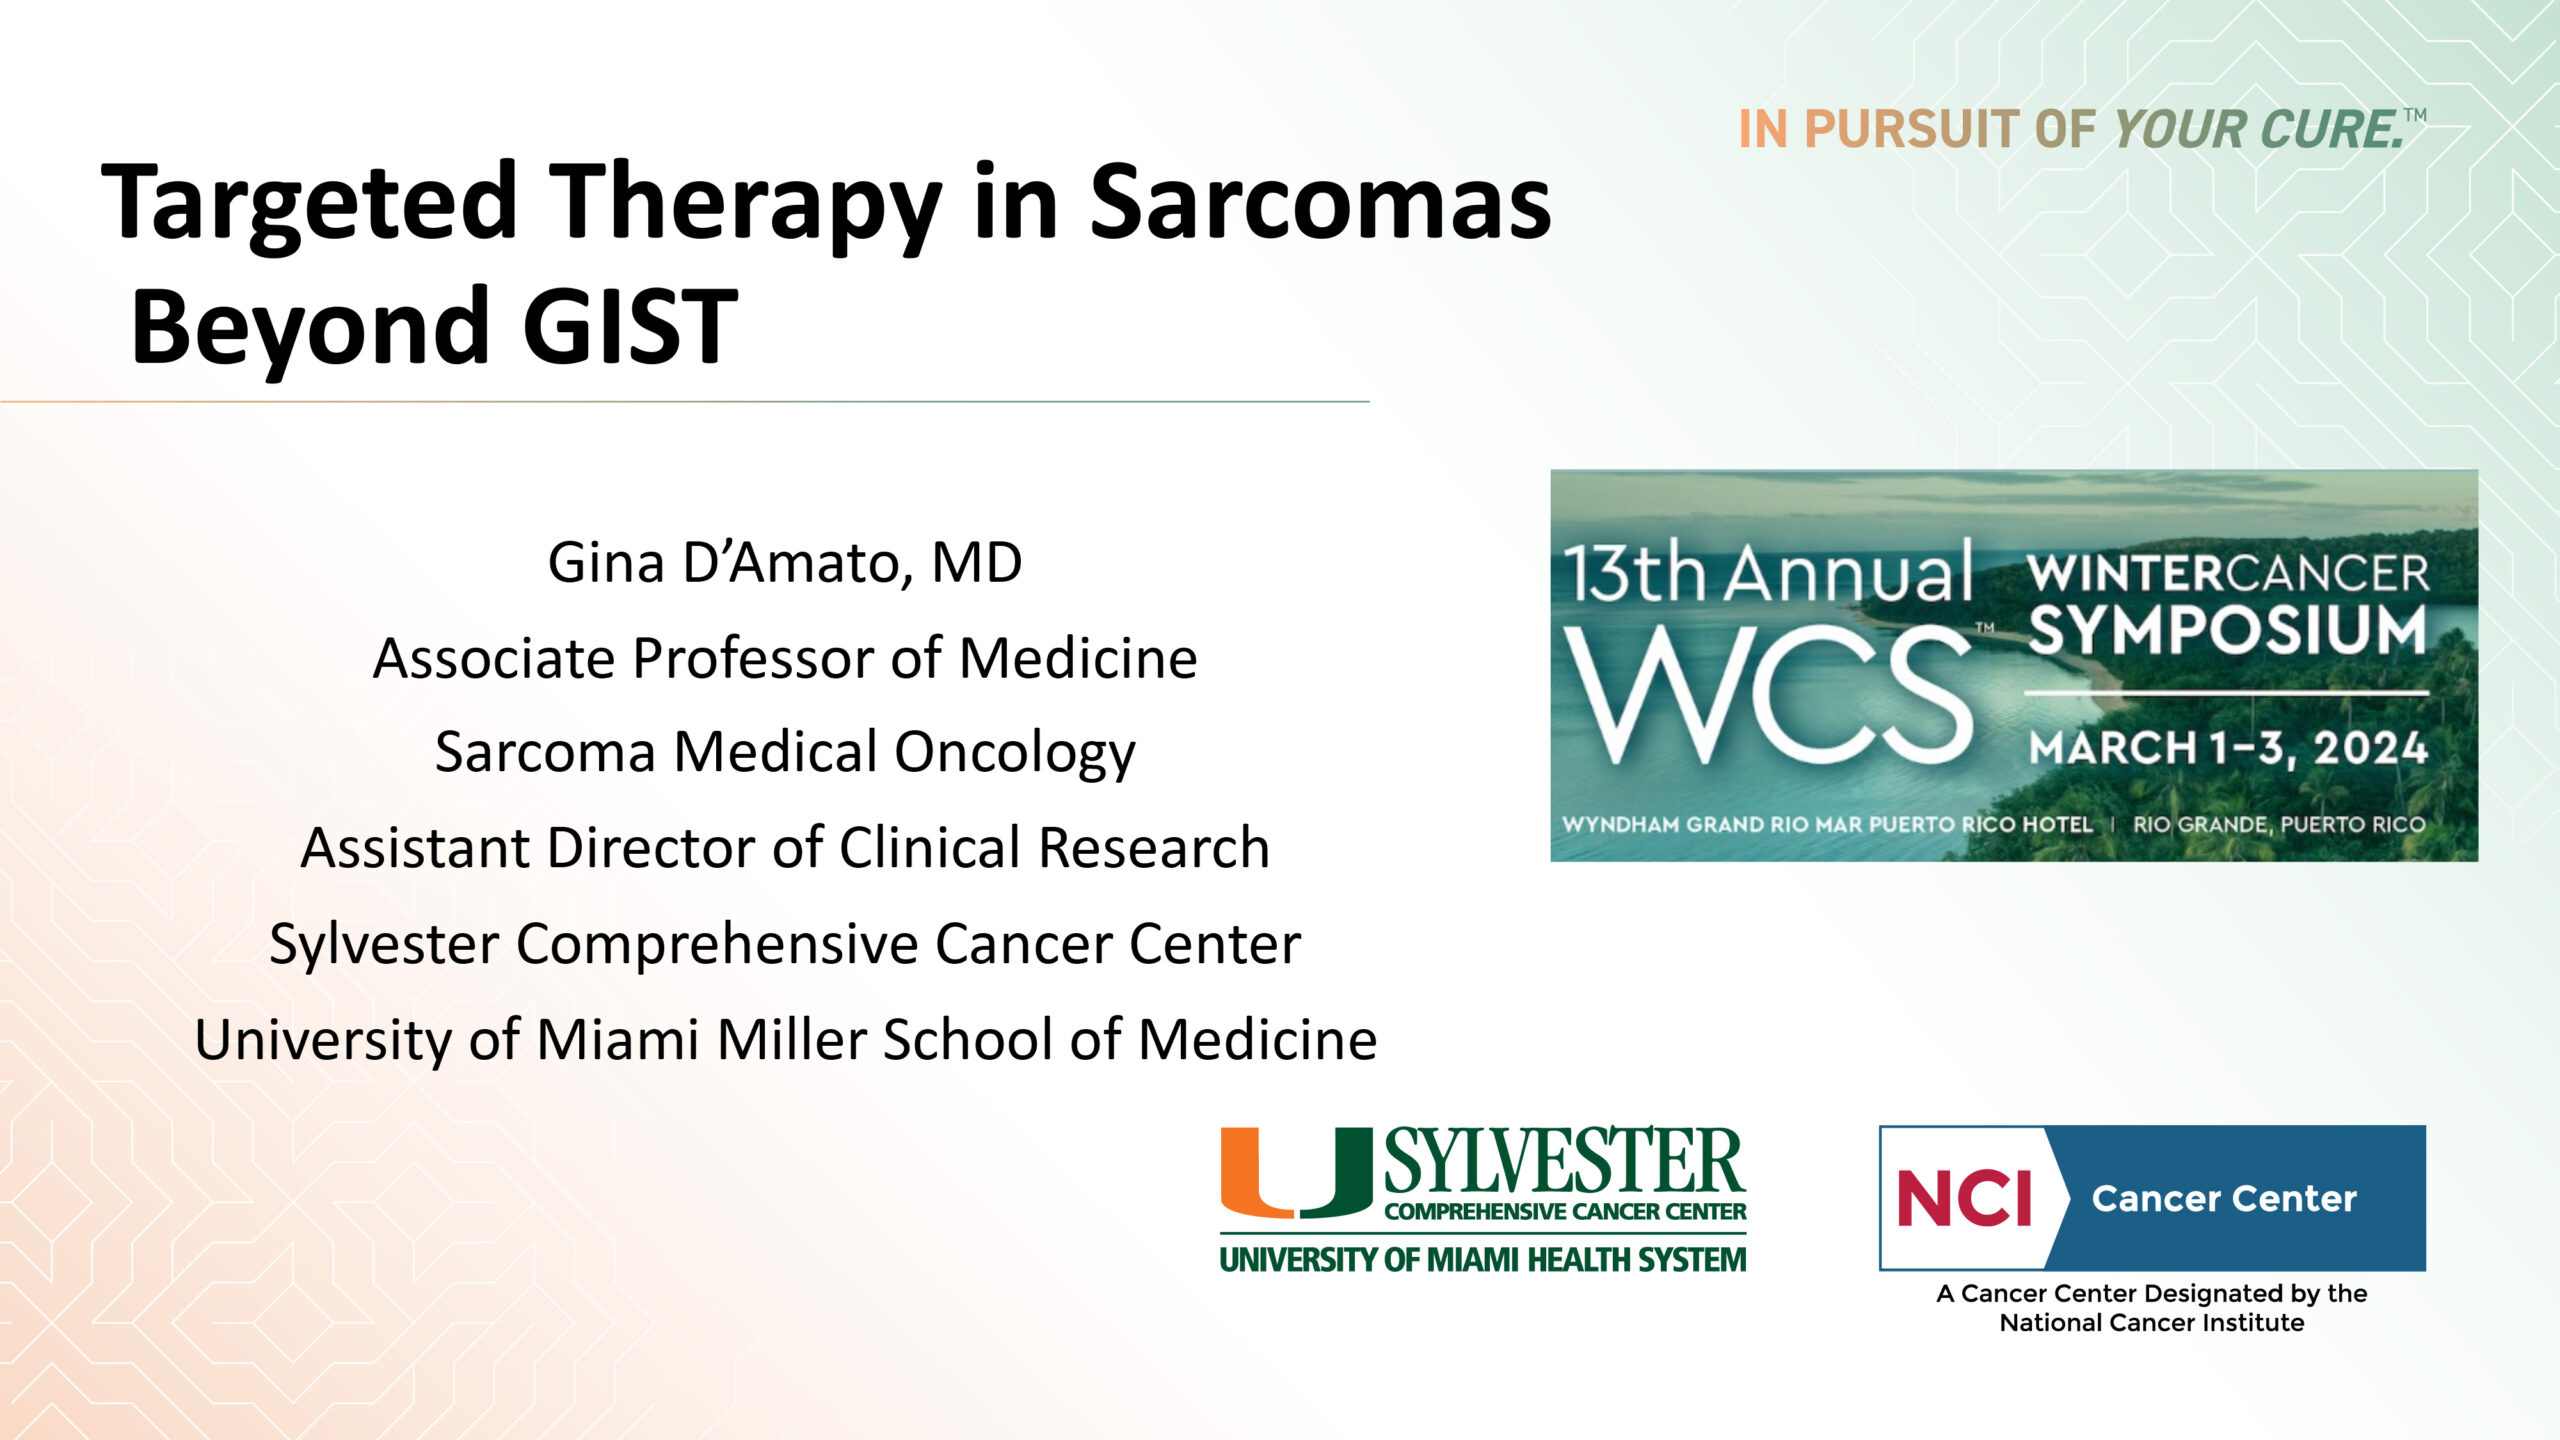 Targeted Therapy in Sarcomas Beyond GIST